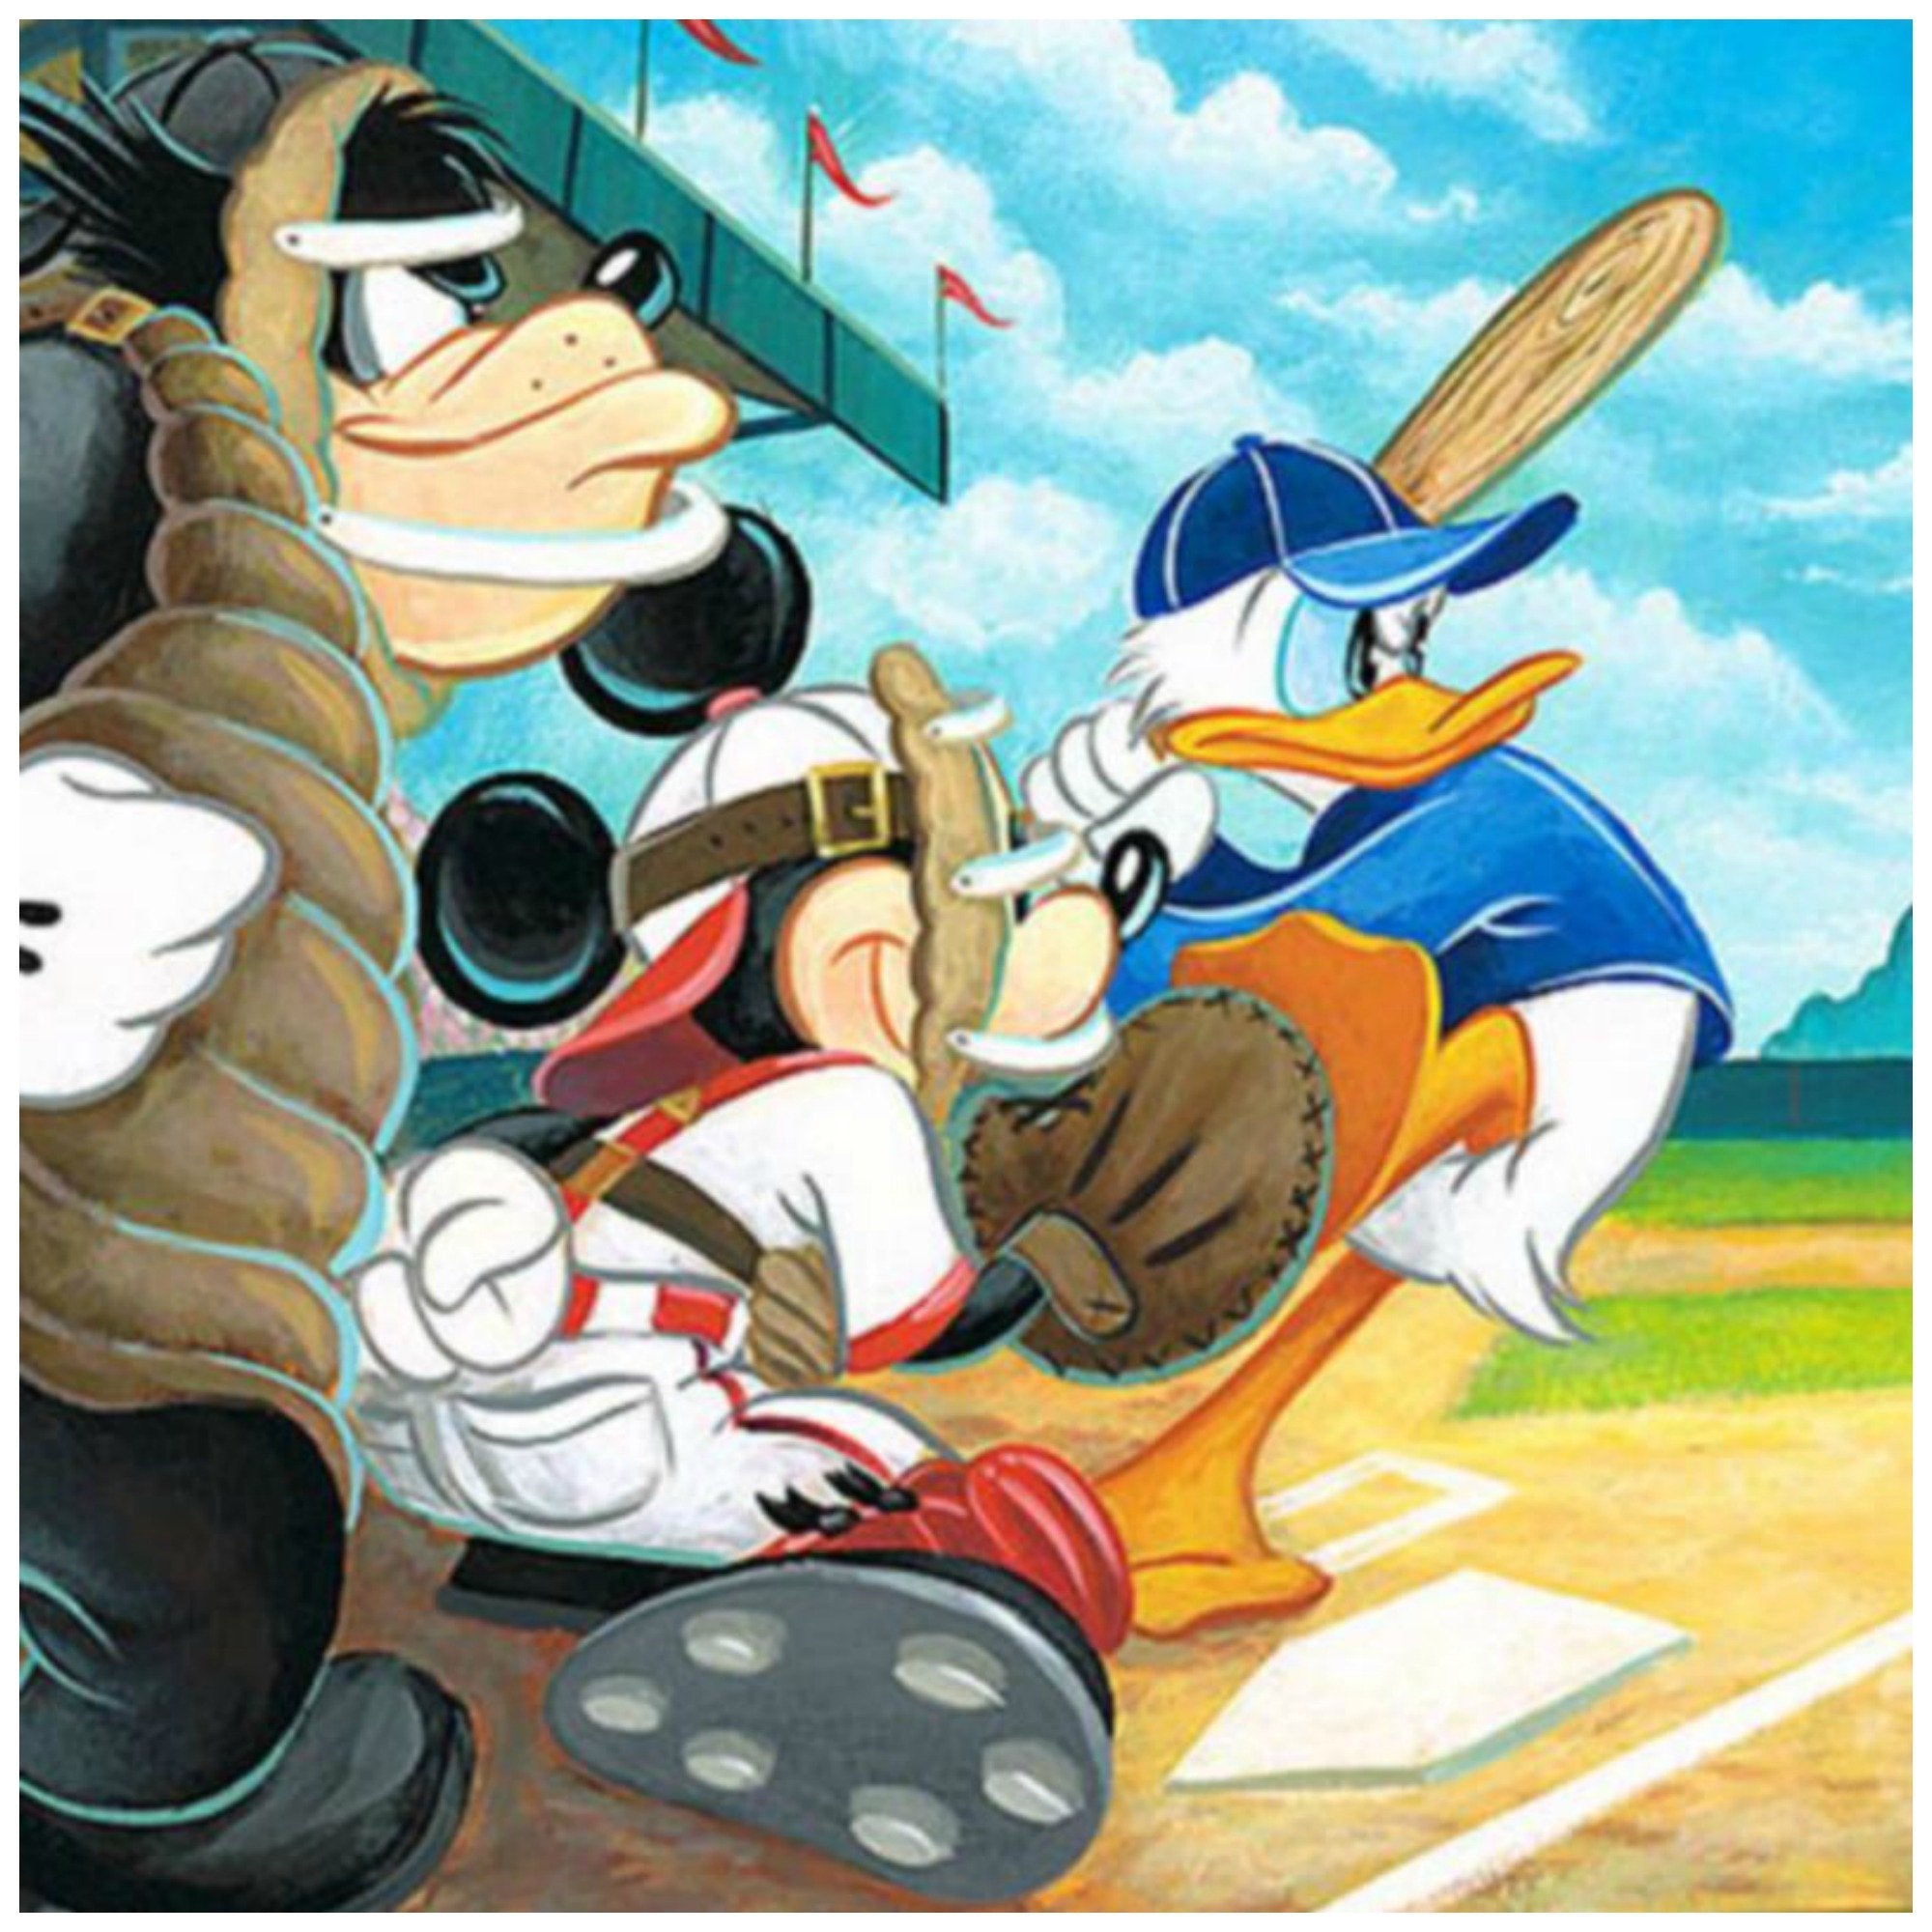 Swing for the Fences by Tim Rogerson  A day at the baseball field, Goofy pitches Donald a swirly ball, with Mickey as the catcher ready to catch if Donald strikes out - closeup